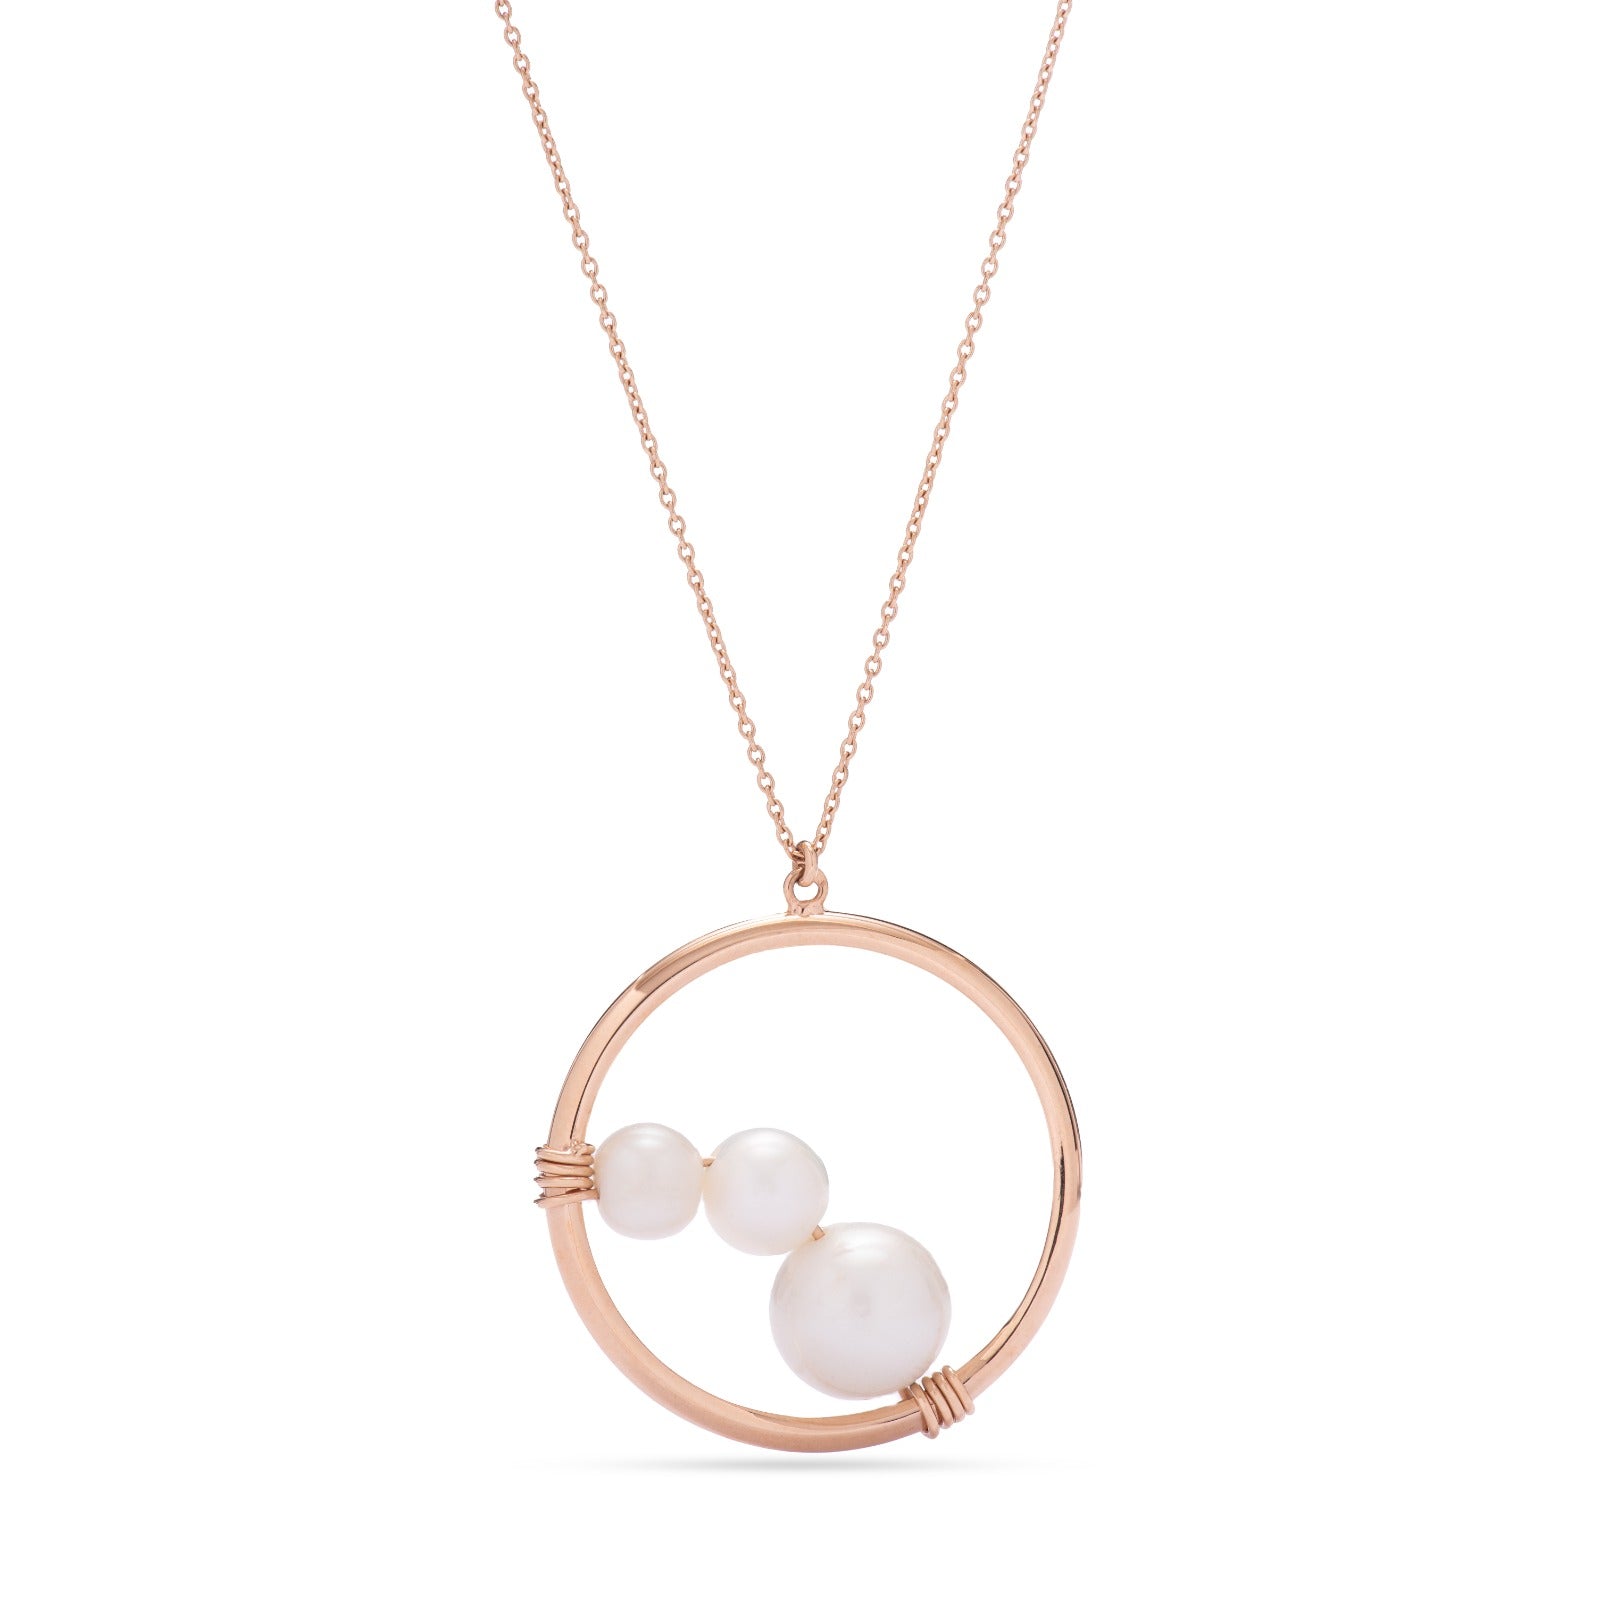 3 pearls in a circular frame necklace in 18K Rose Gold - SIR1349